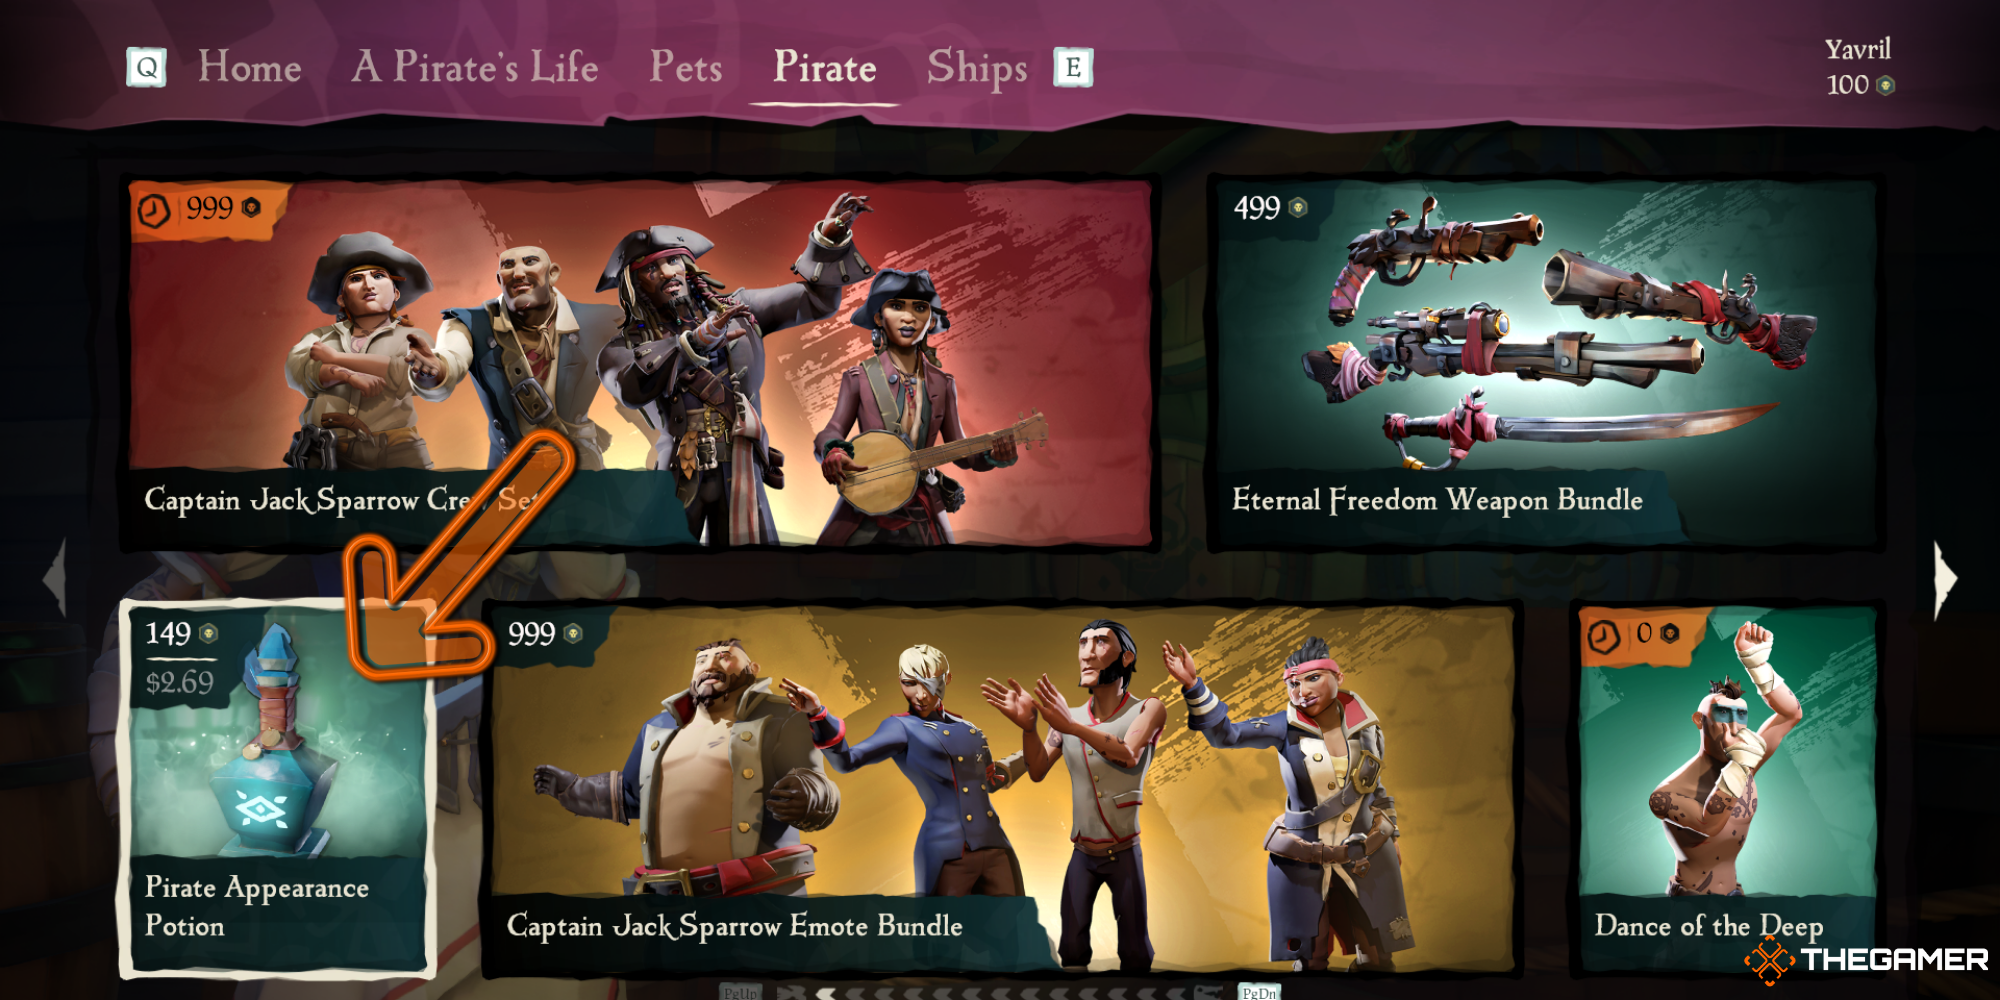 Sea of Thieves - Pirate Emporium with arrow directing the viewer to the Pirate Appearance Potion